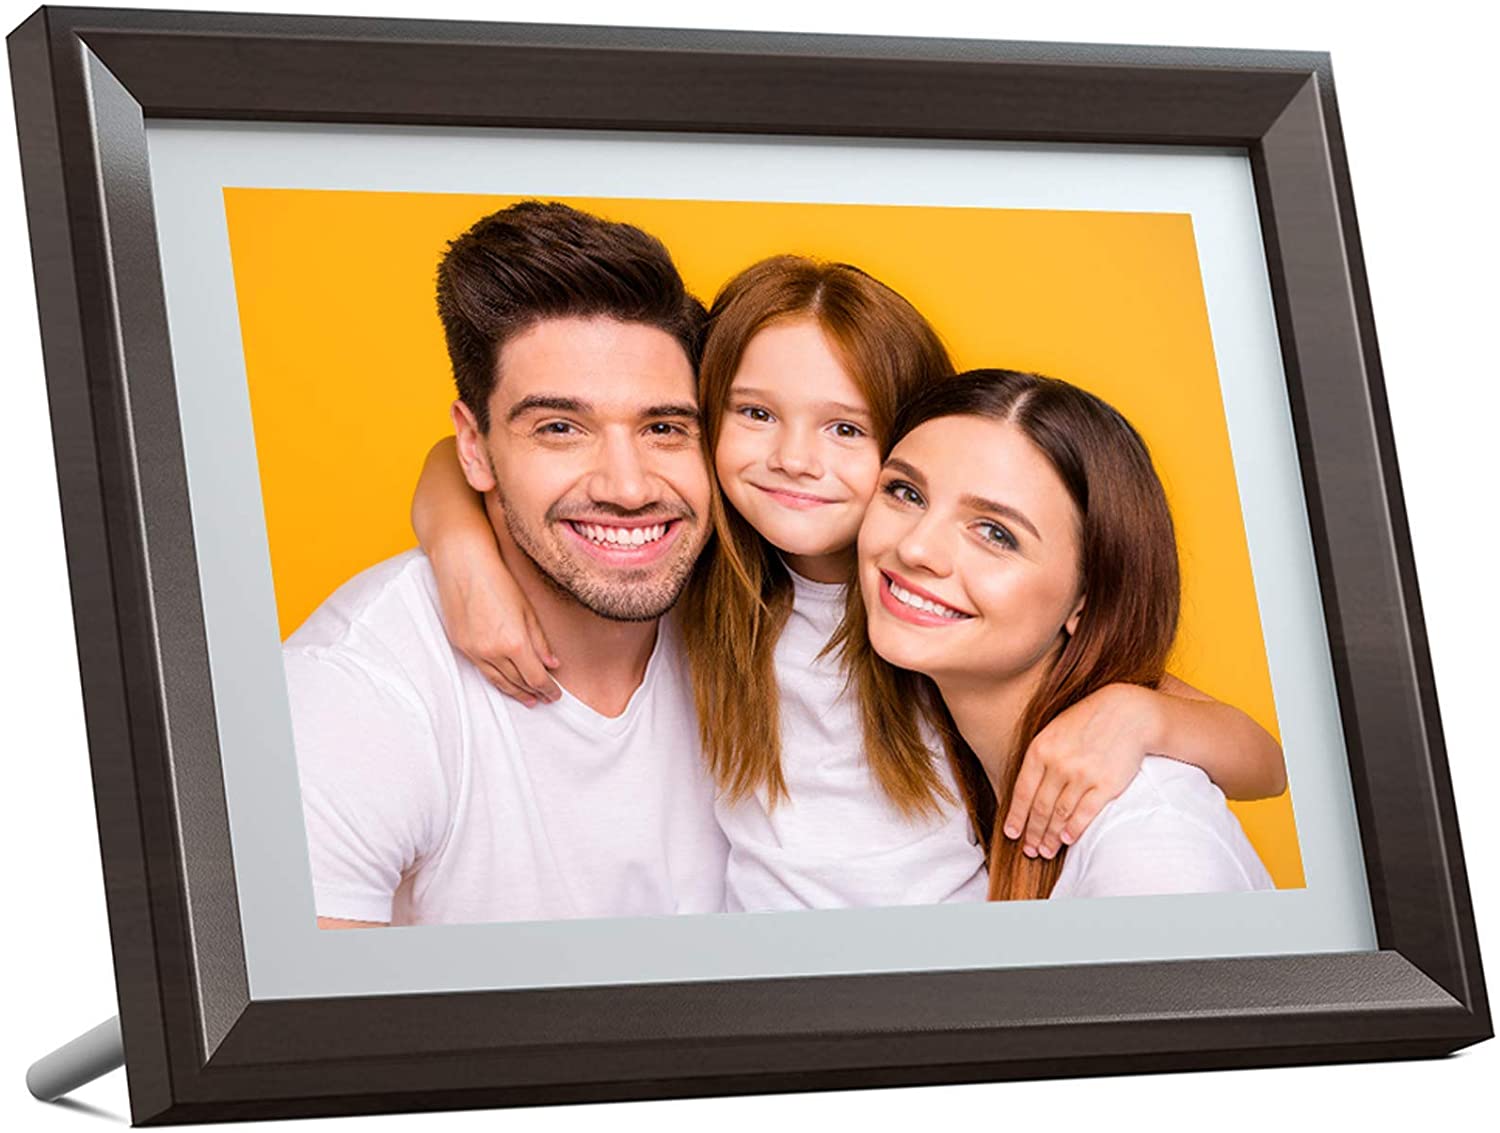 Dragon Touch 2K Digital Picture Frame Email Share Photos via App 10 Inch Wi-Fi Digital Photo Frame with Touch Screen Display Modern 10 Aqua Cloud 